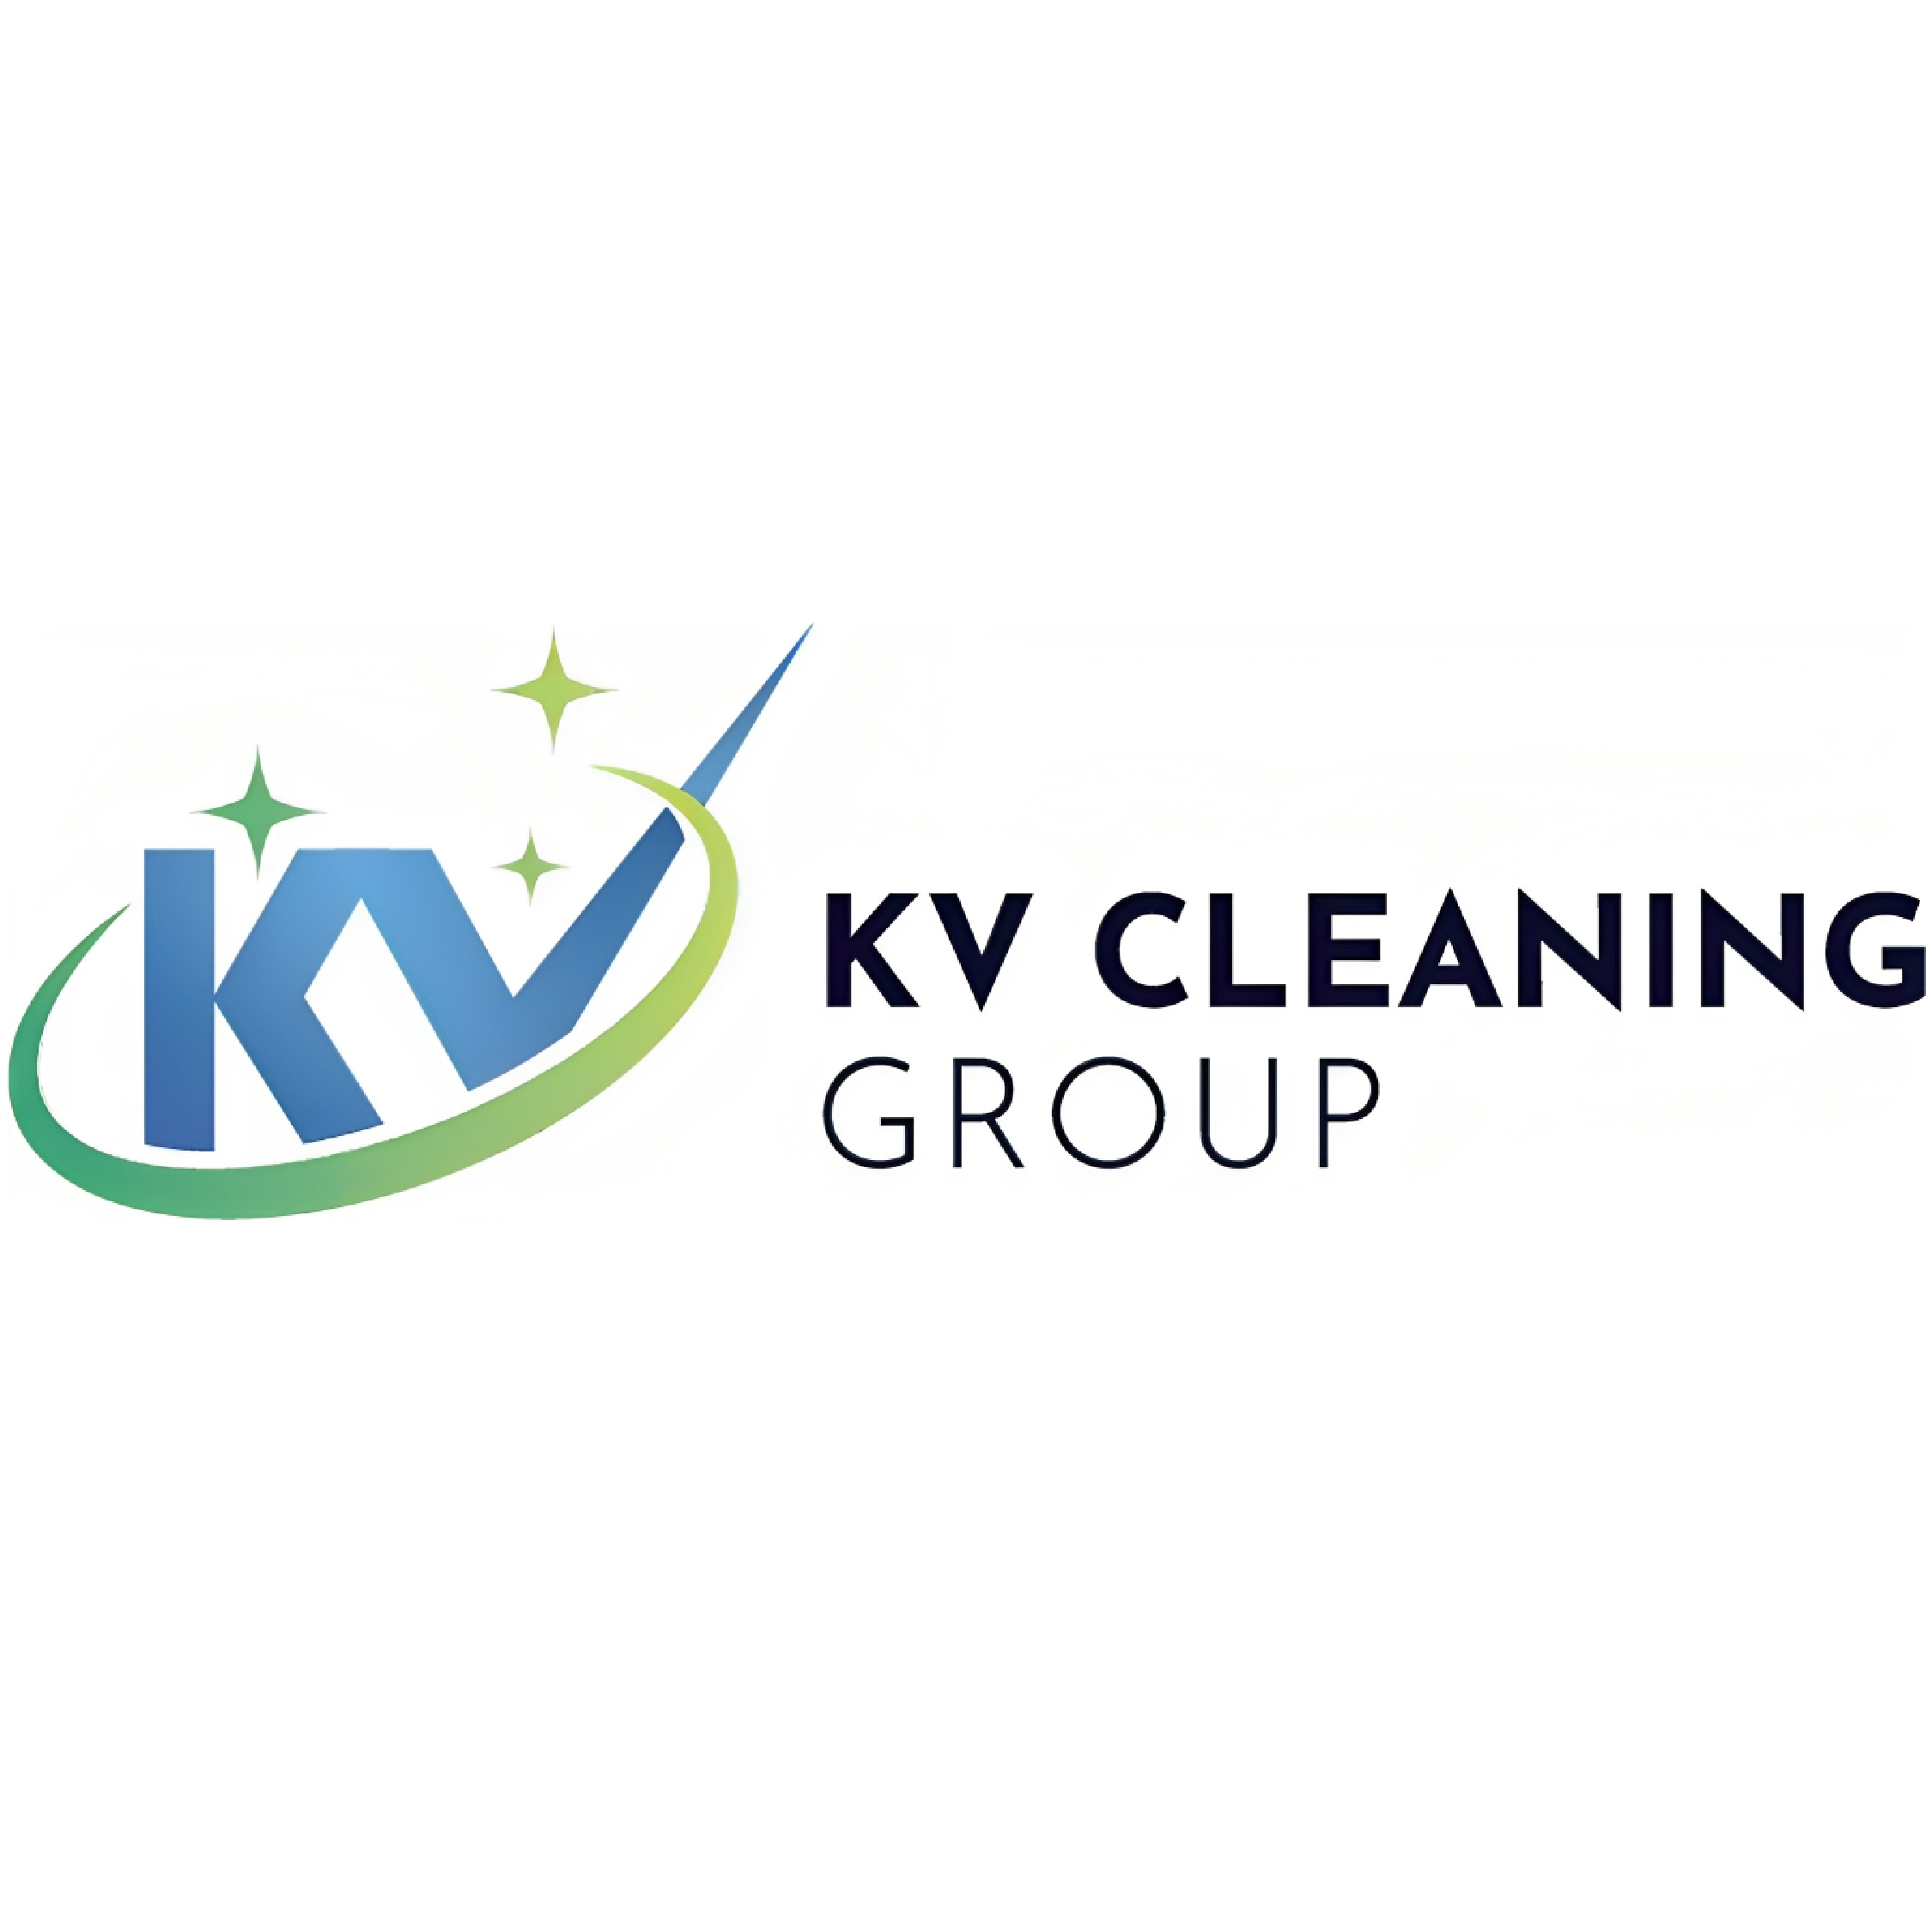 KV Cleaning